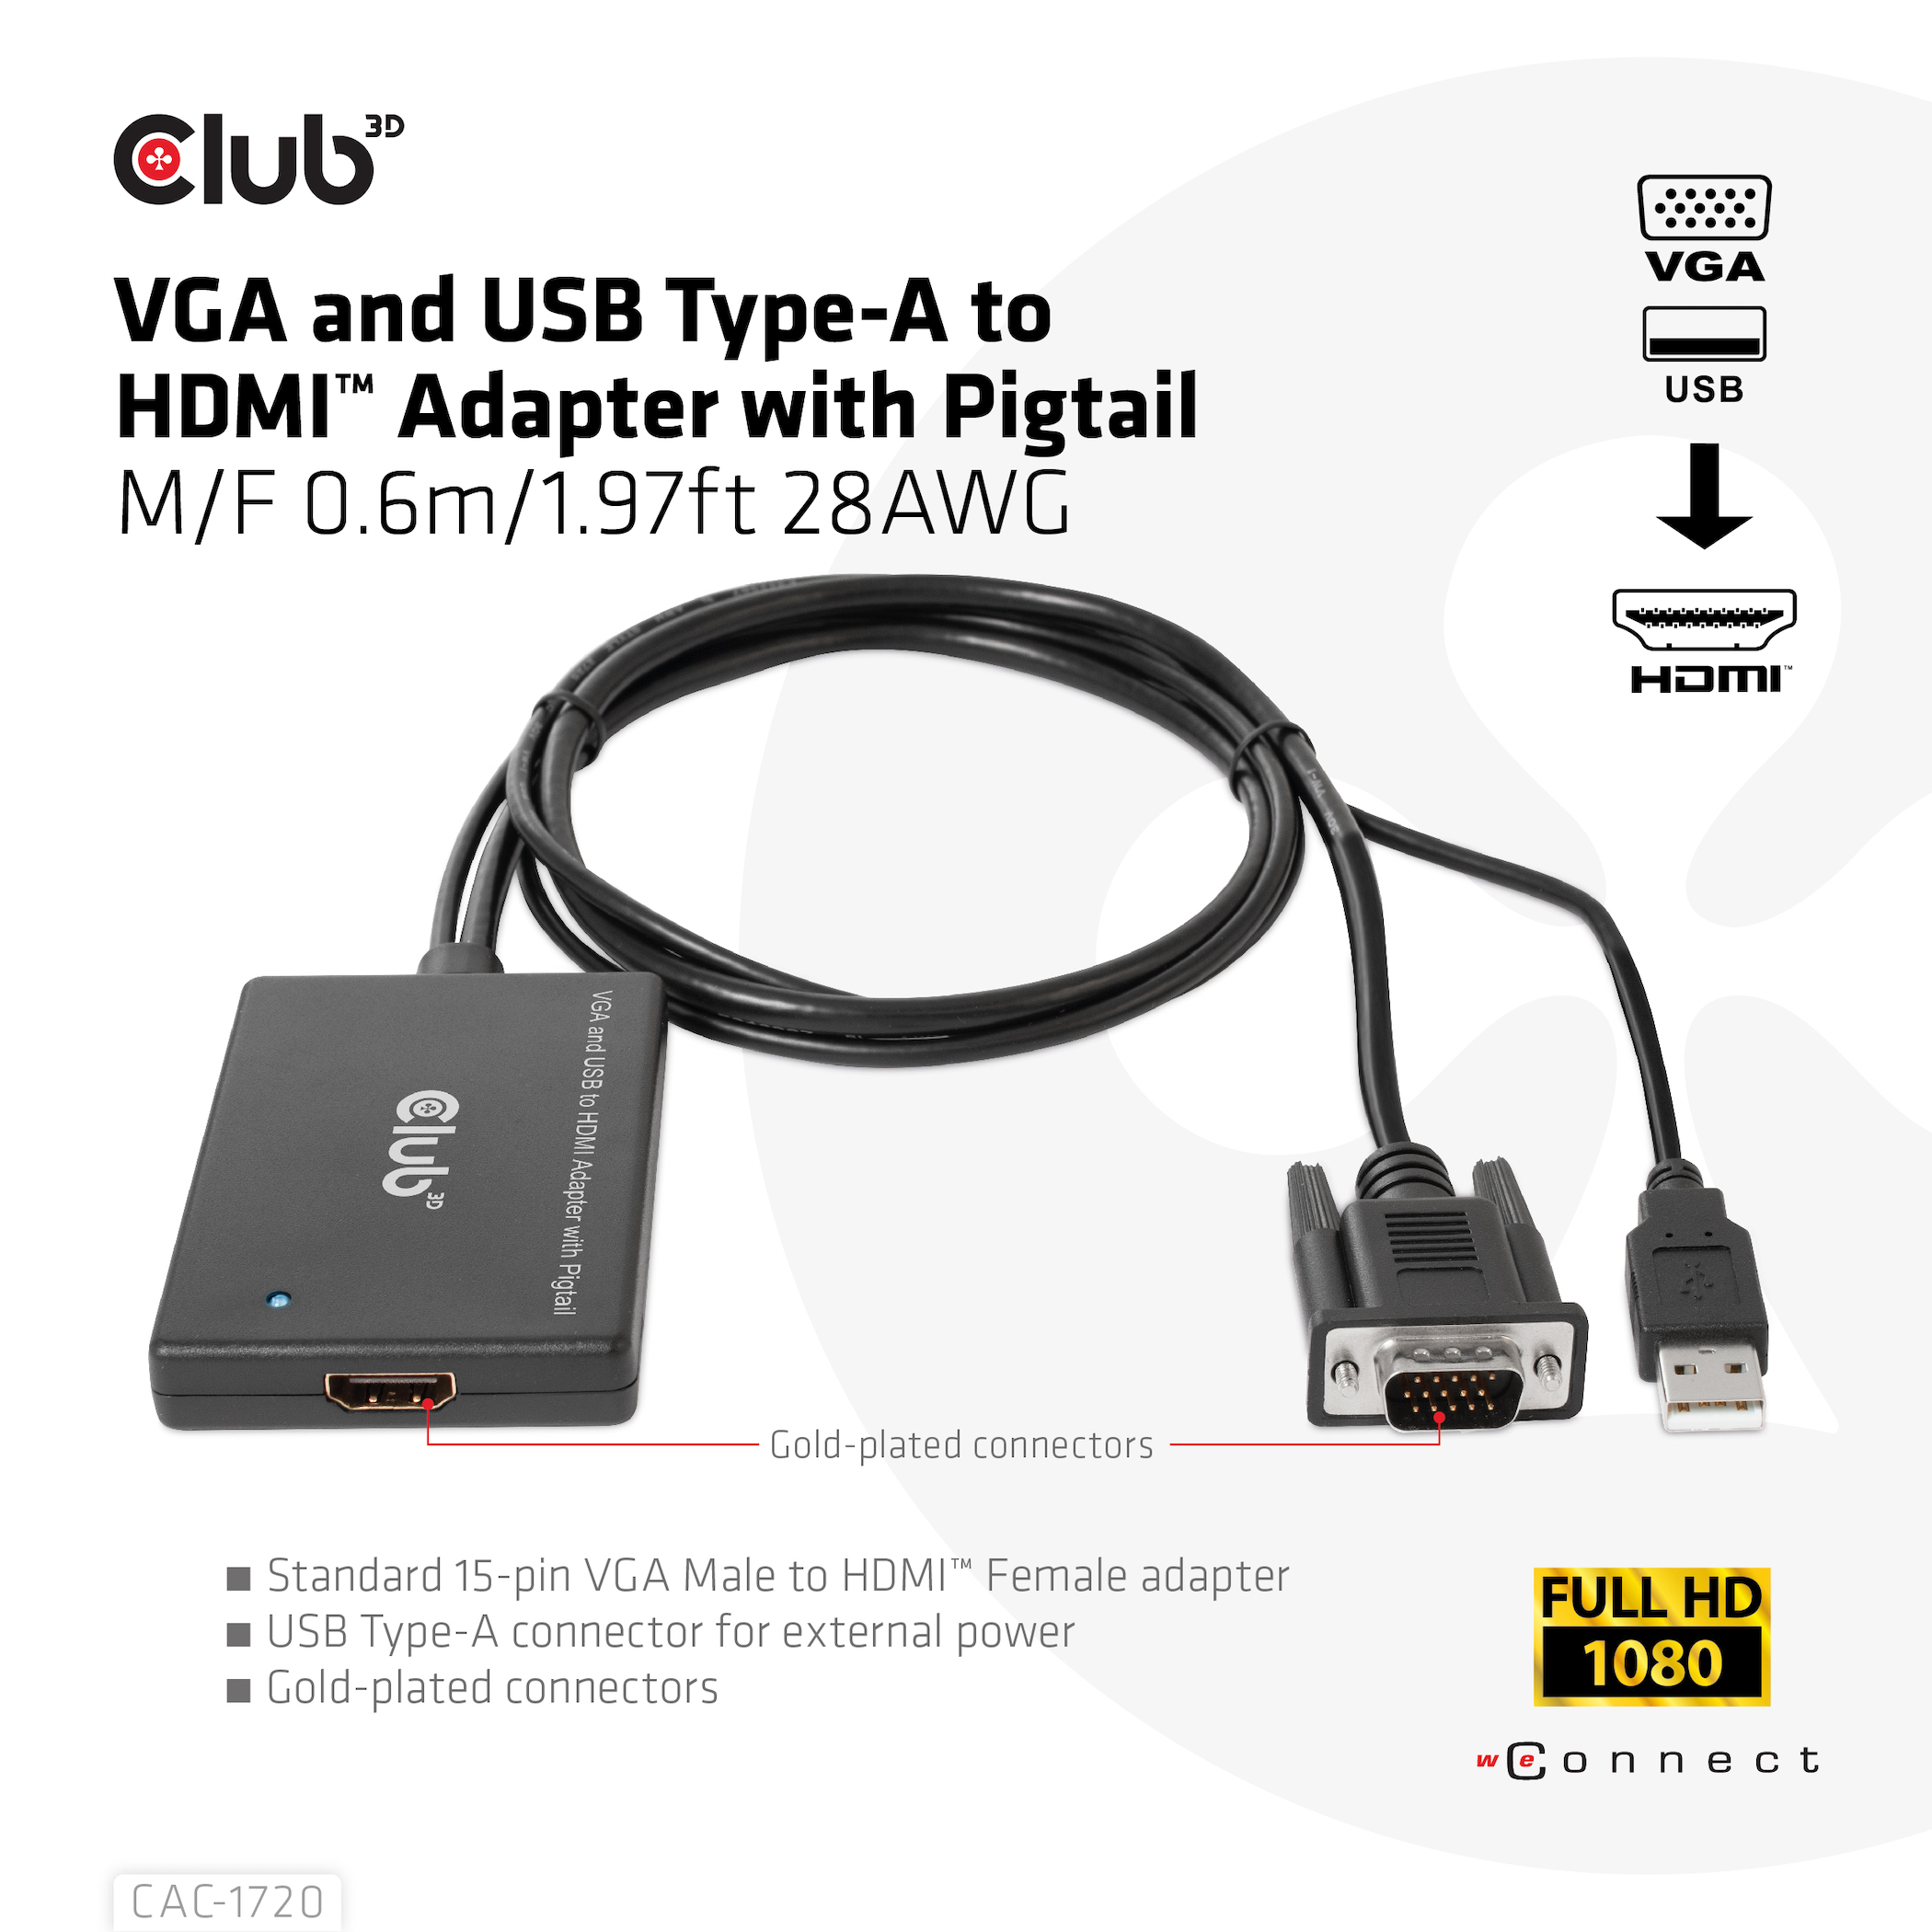 VGA AND USB TYPE-A TO HDMI ADAPTER WITHPIGTAIL M/F 0.6m 28AWG